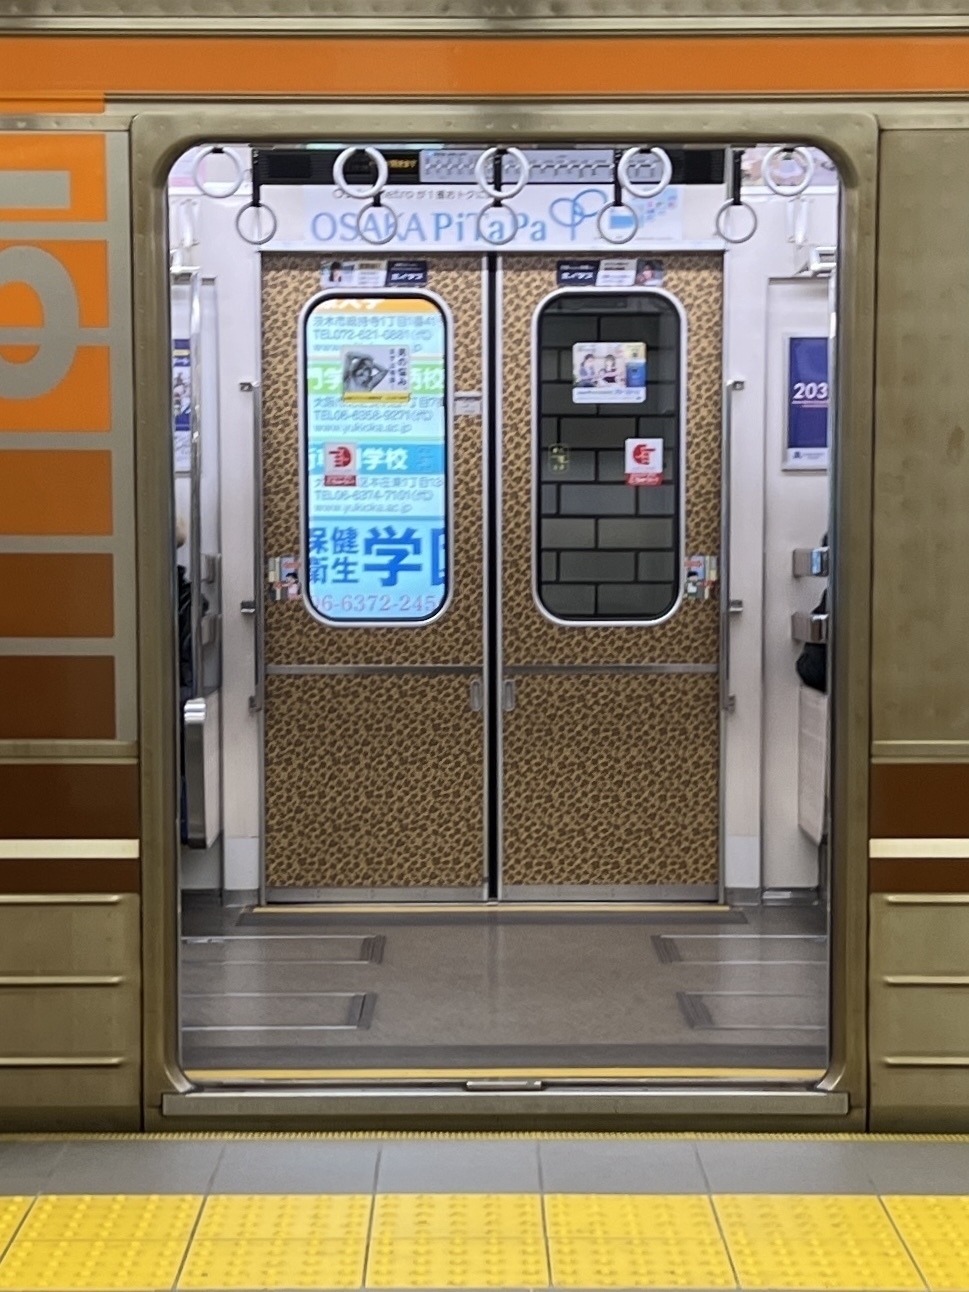 Osaka Metro subway car doors open revealing the interior. The doors on the other side have a leopard print design